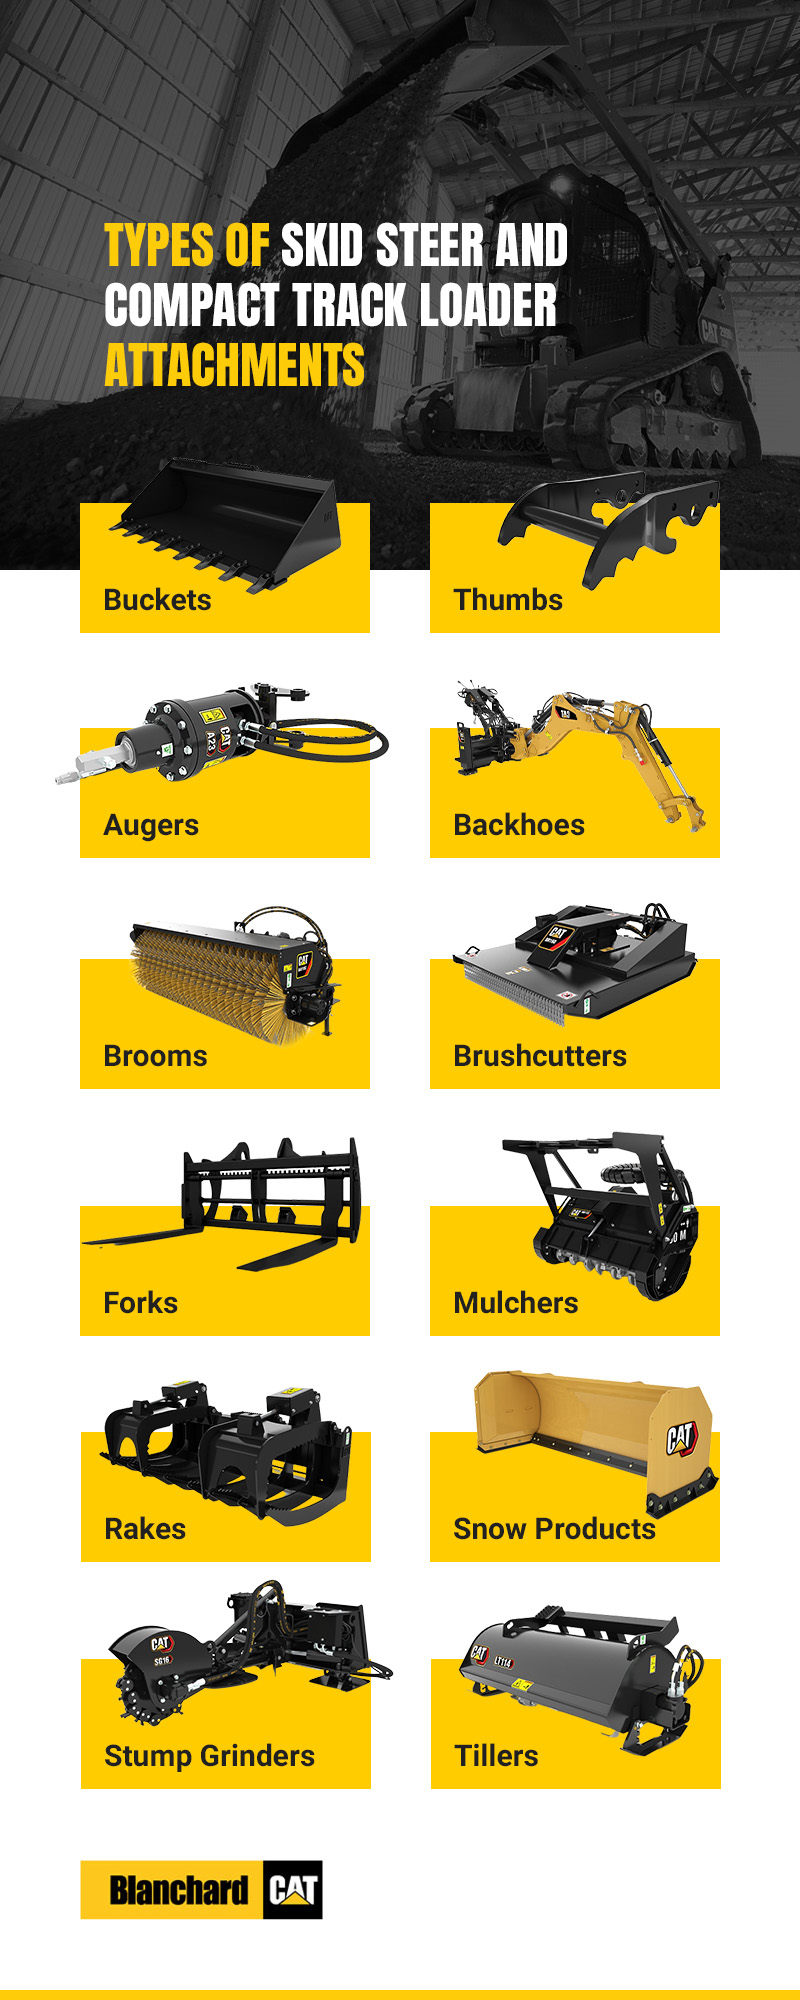 Types of Skid Steer and Compact Track Loader Attachments